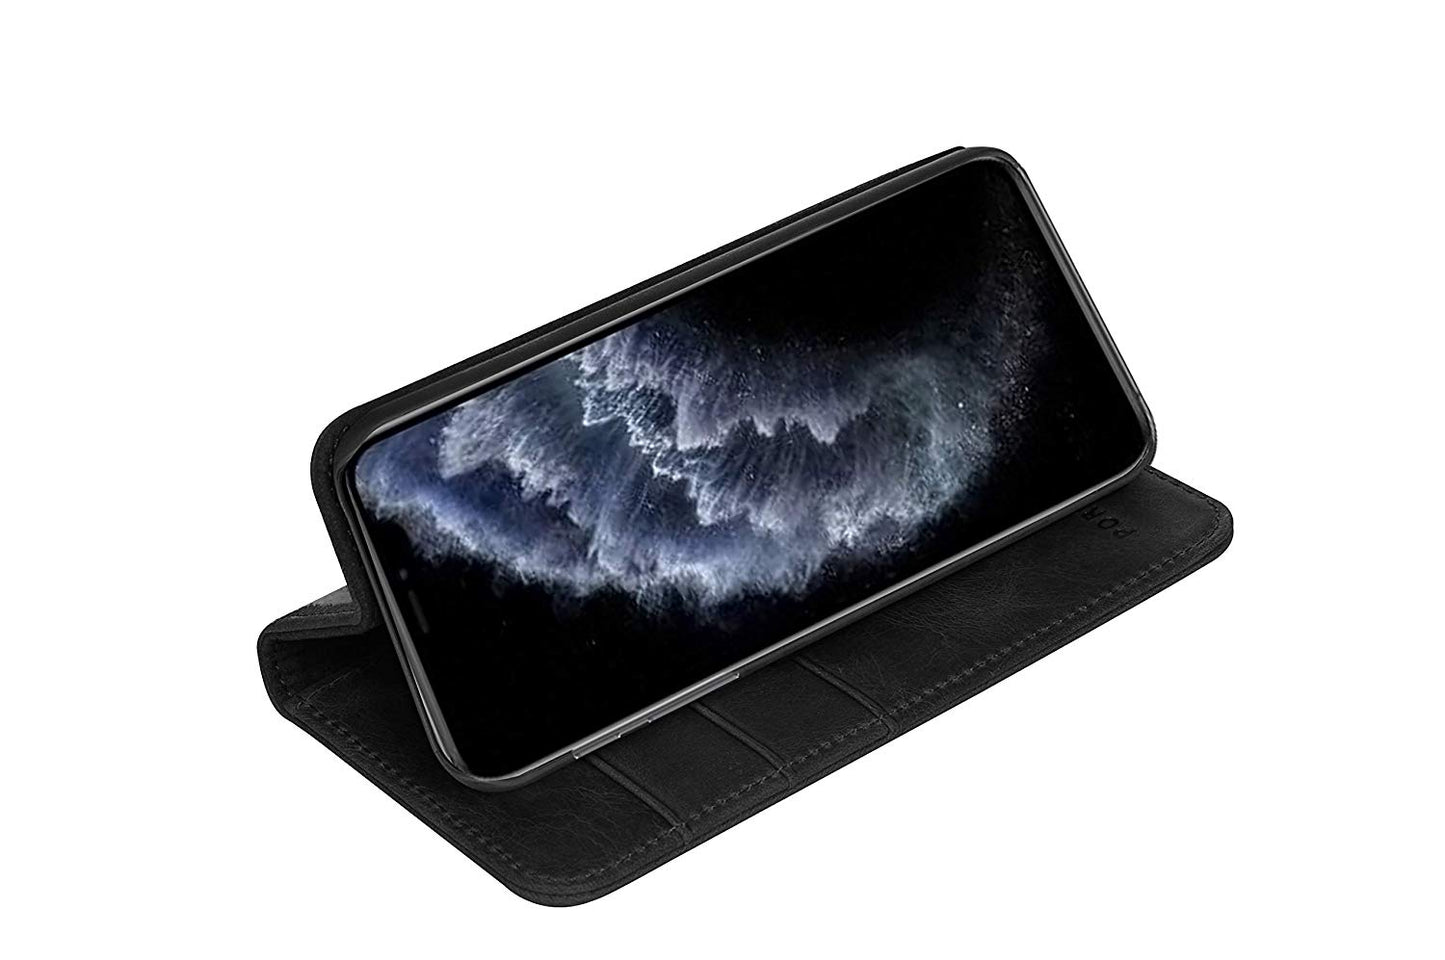 iPhone 11 Pro Leather Case. Premium Slim Genuine Leather Stand Case/Cover/Wallet (Pure Black)